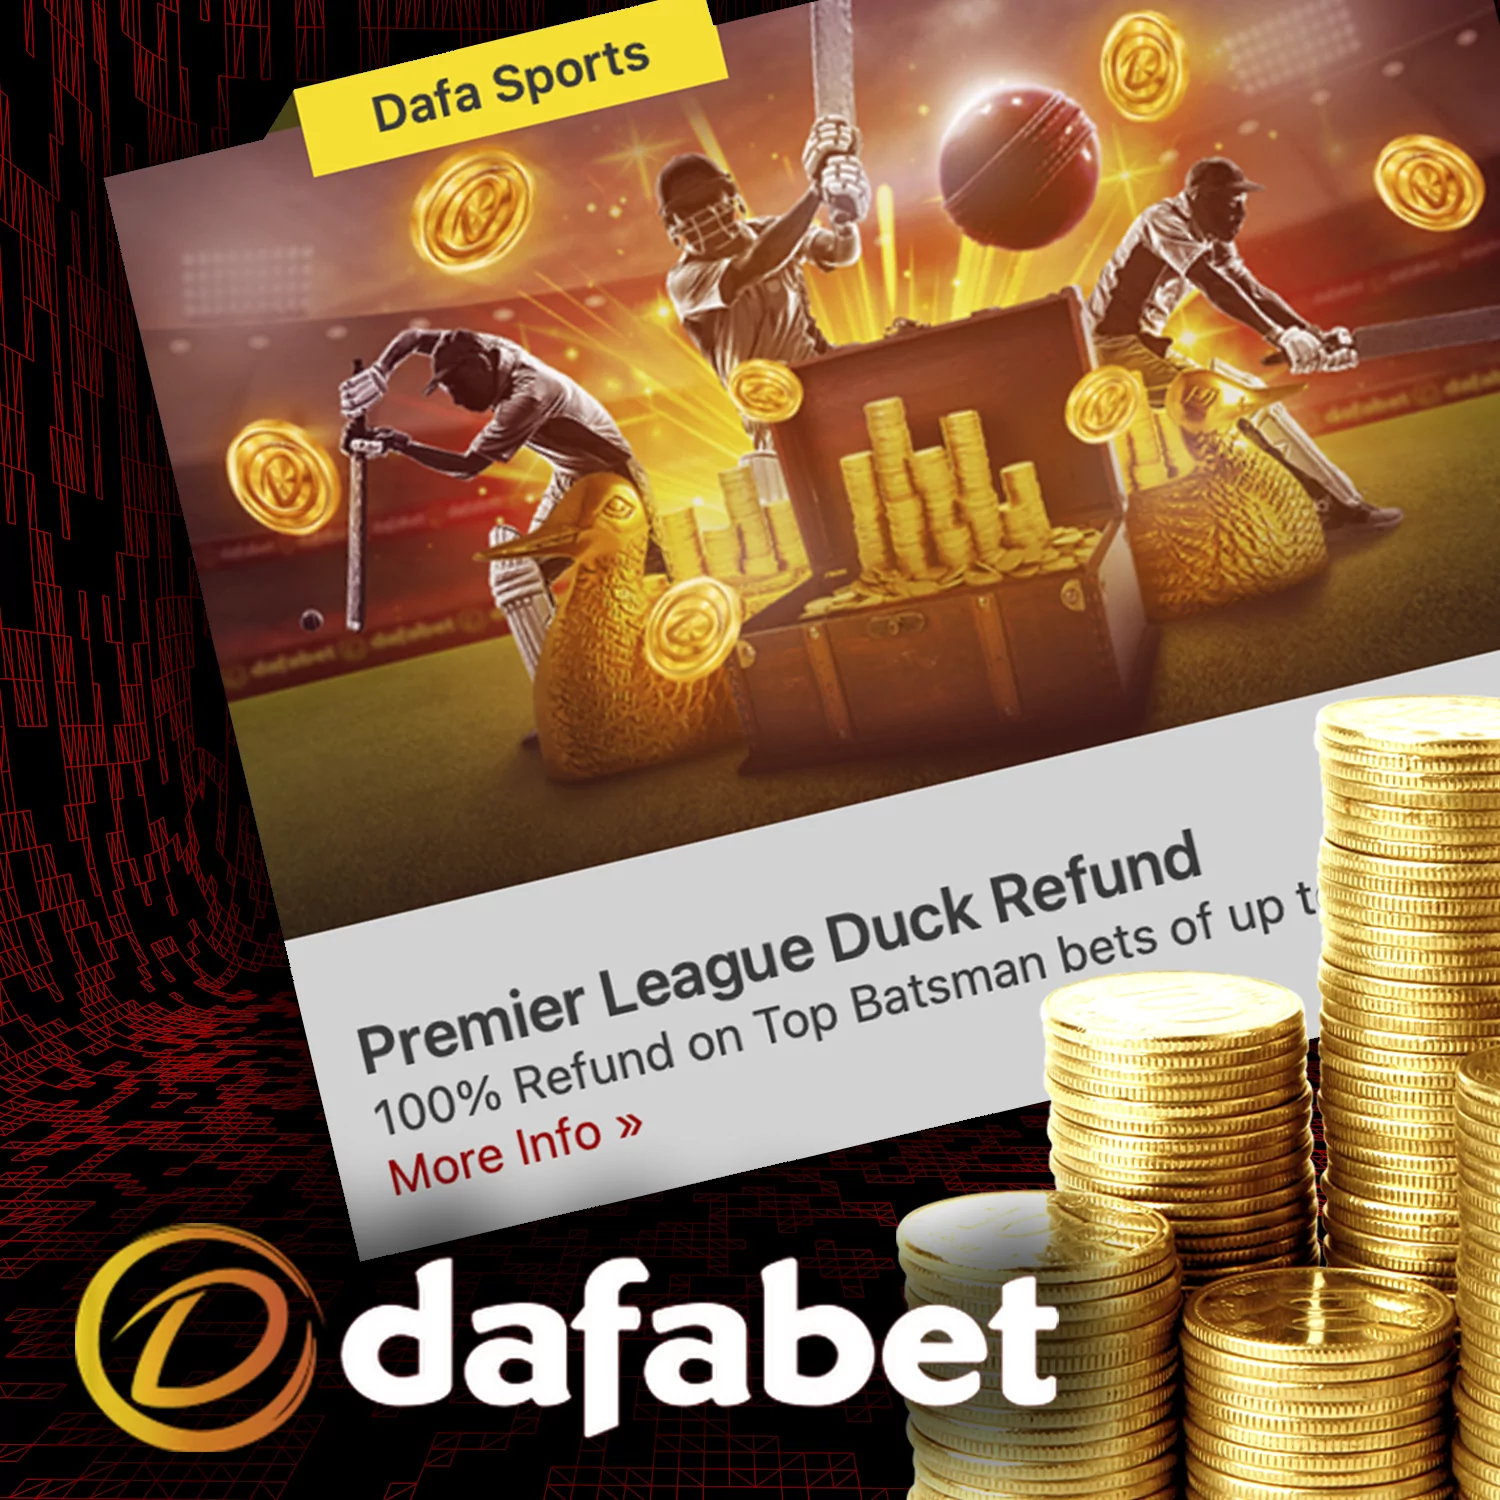 Dafabet offers a special bonus for betting on the IPL.